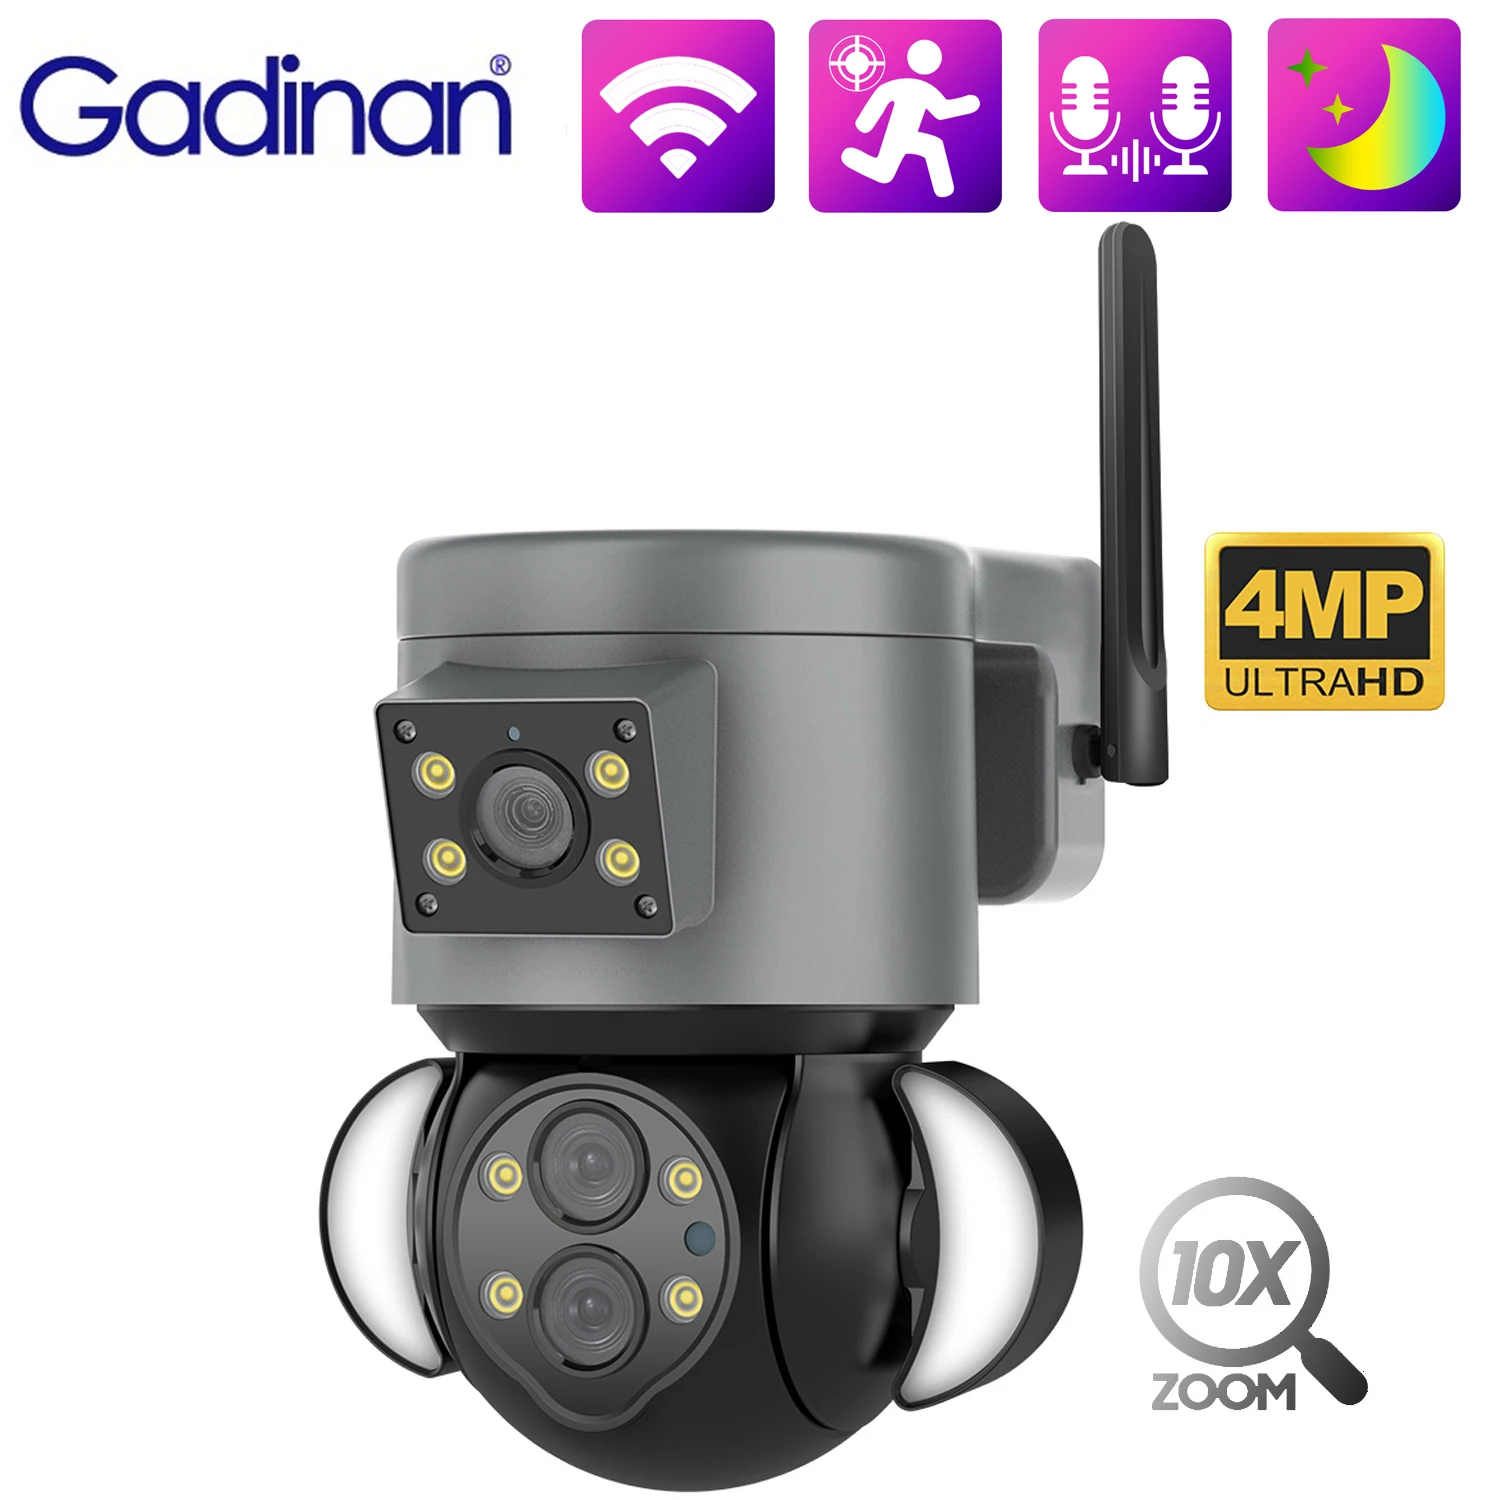 

Gadinan HD 4MP WIFI Color Night Vision Wide Angle 10x Zoom Surveillance Camera PTZ Dual Channel Video Motion Tracking IP Camera